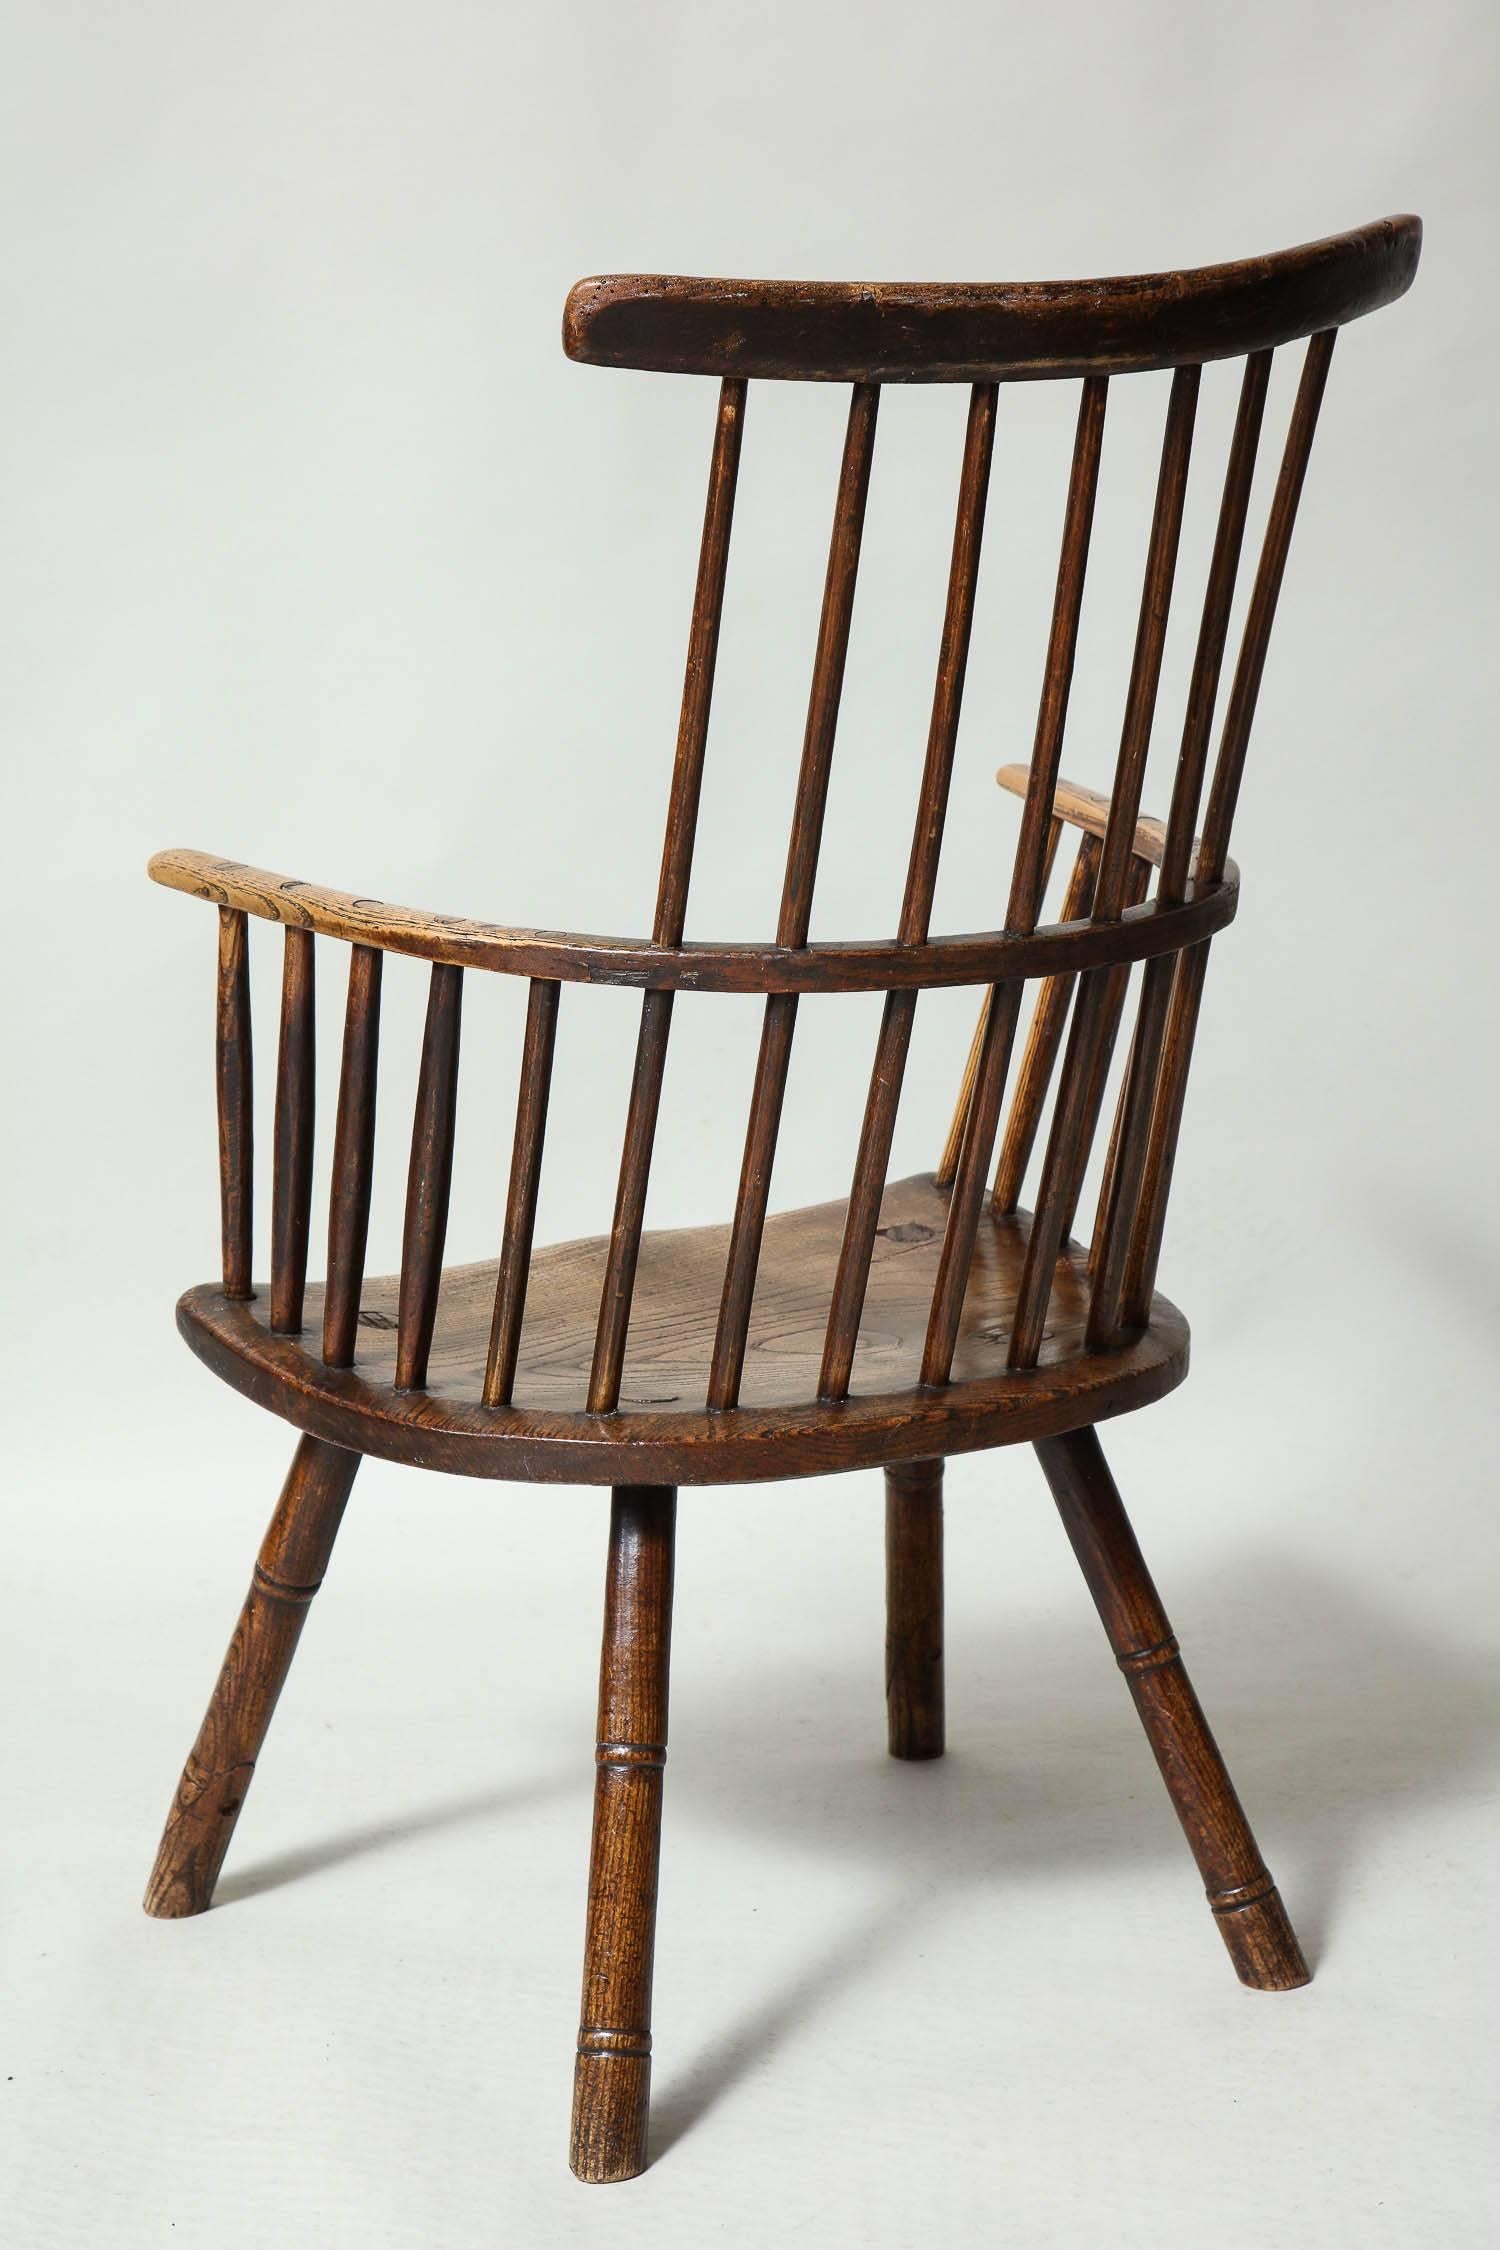 Late 18th Century Rustic 18th Century English Comb Back Windsor Armchair